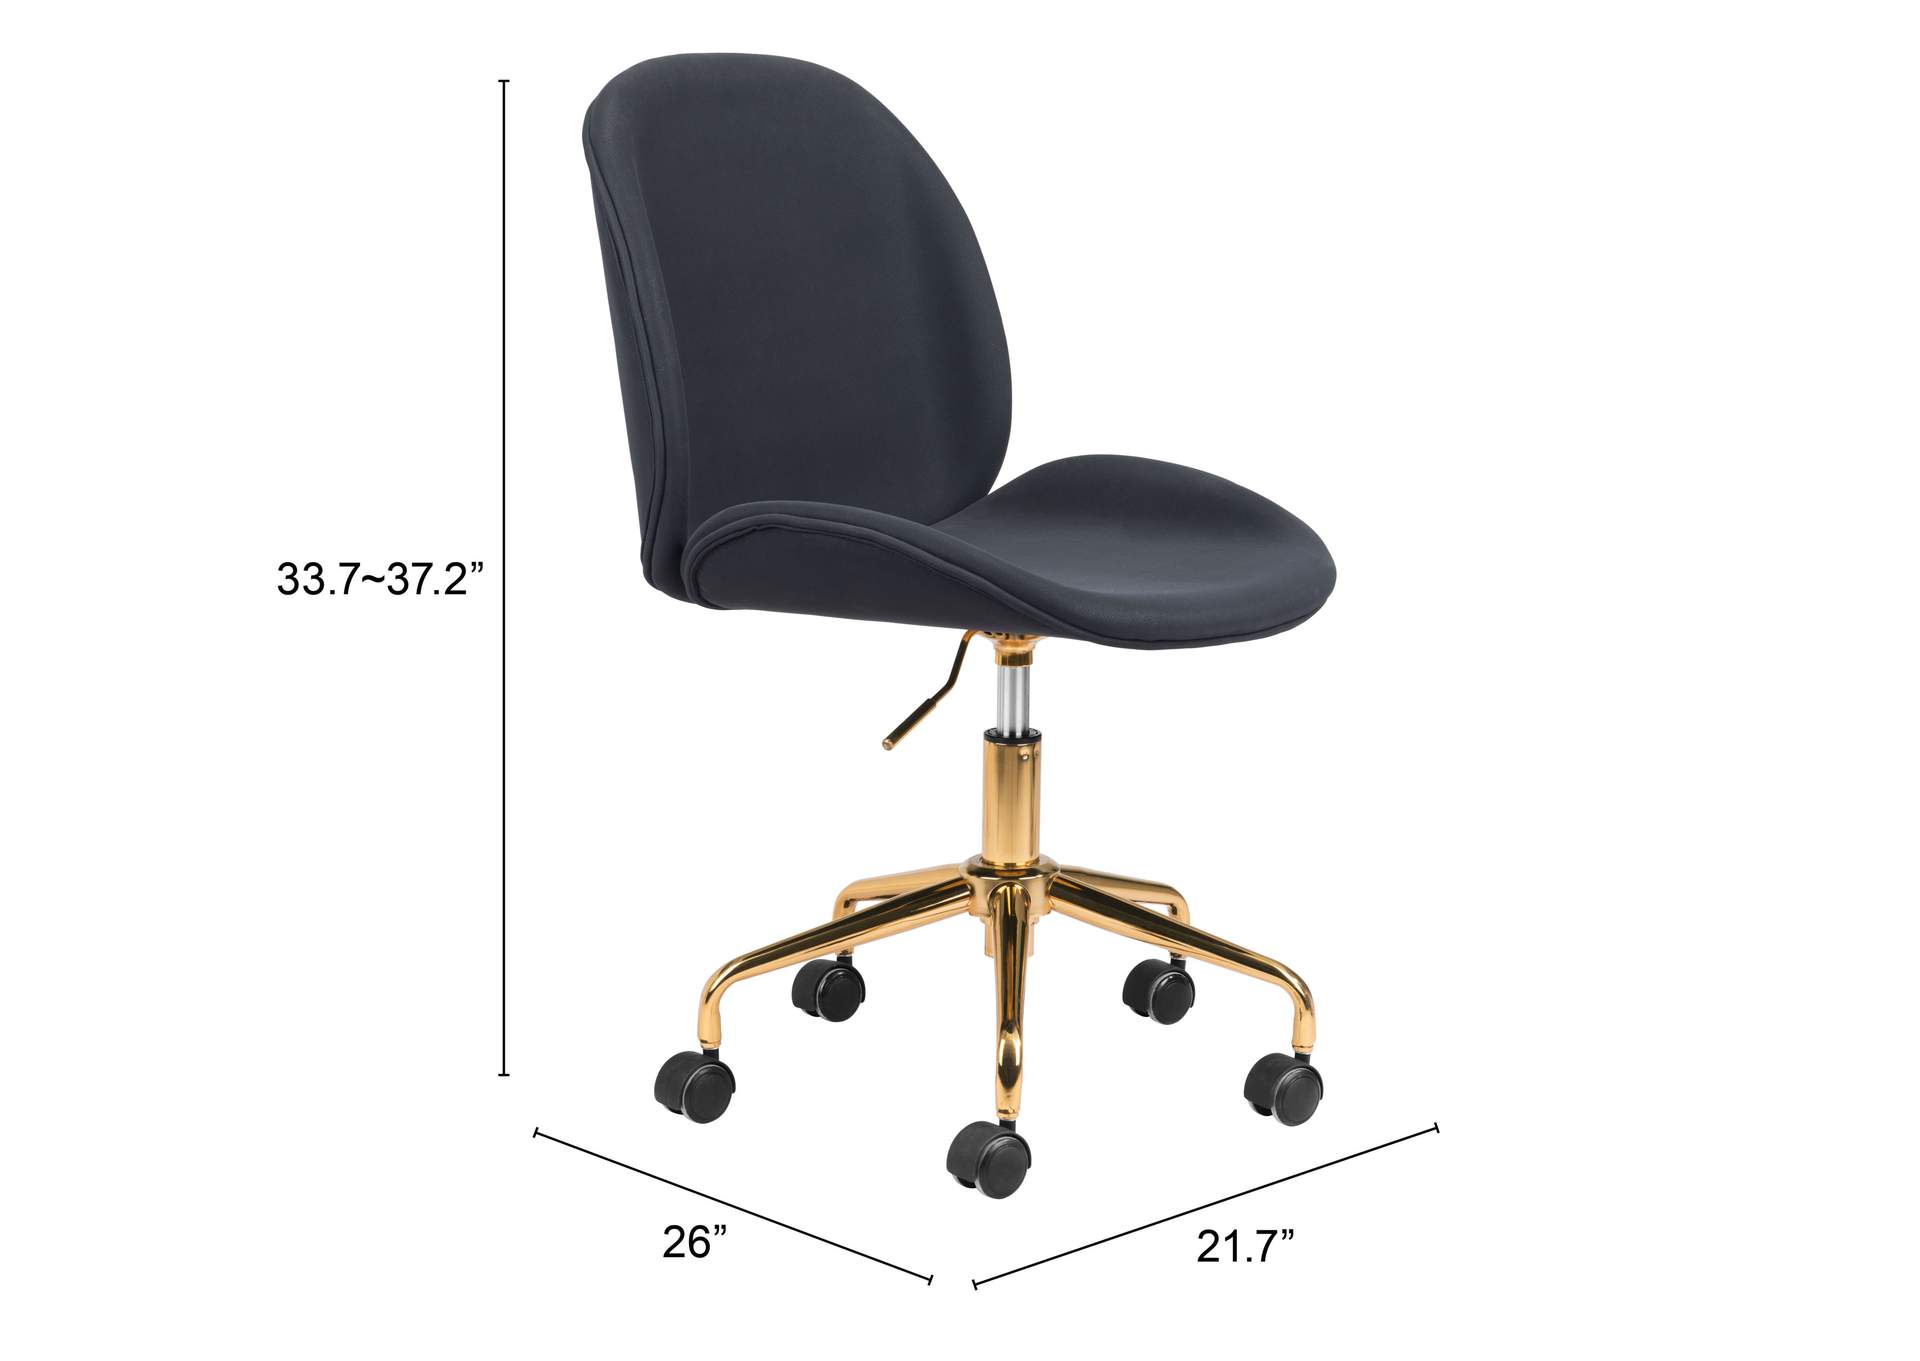 Miles Office Chair Black,Zuo